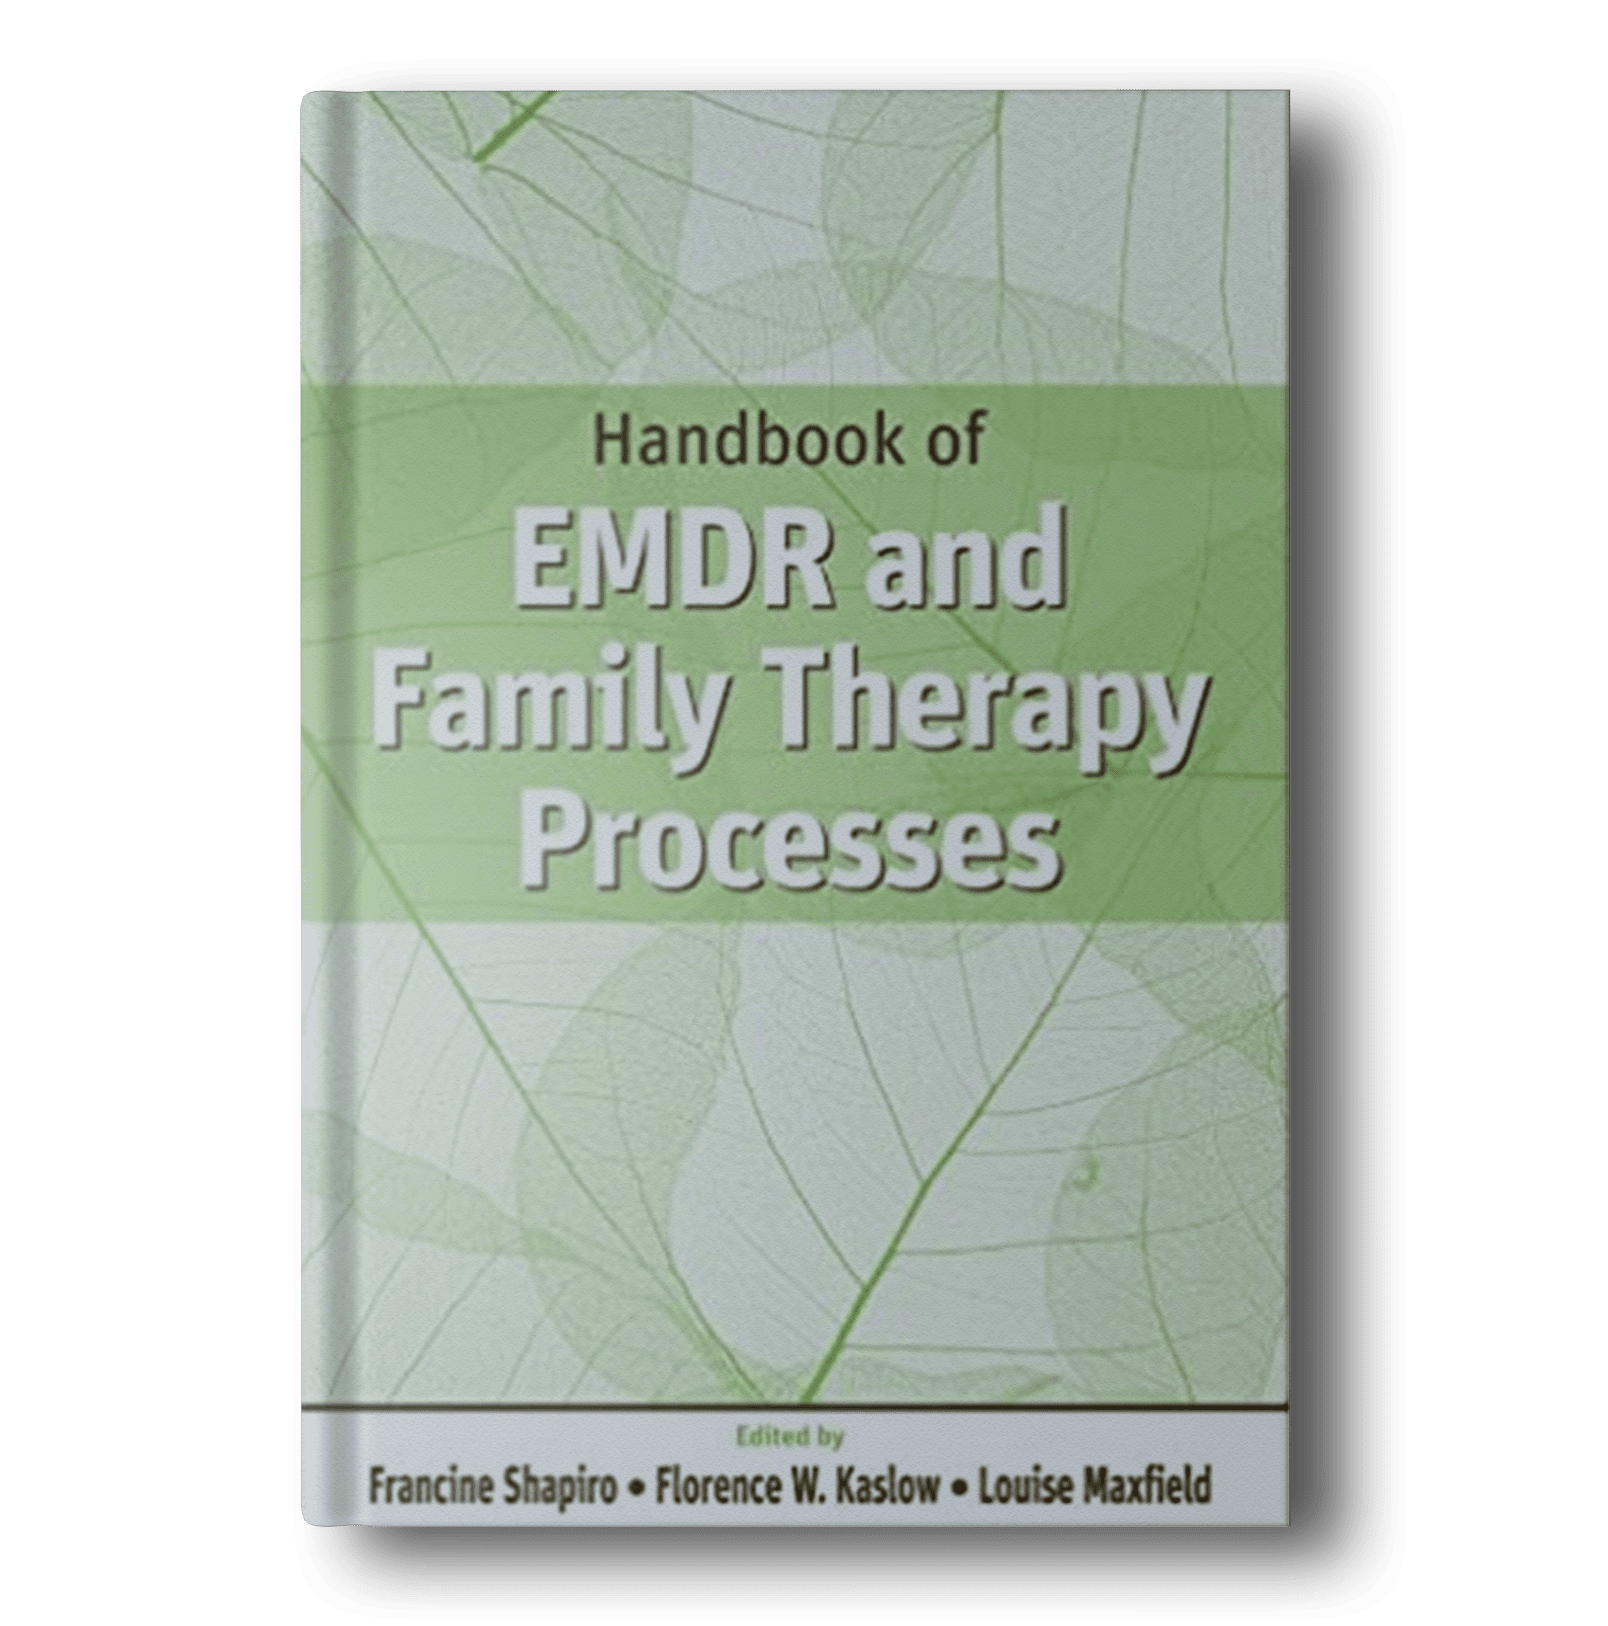 Handbook-of-EMDR-and-Family-Therapy-Processes